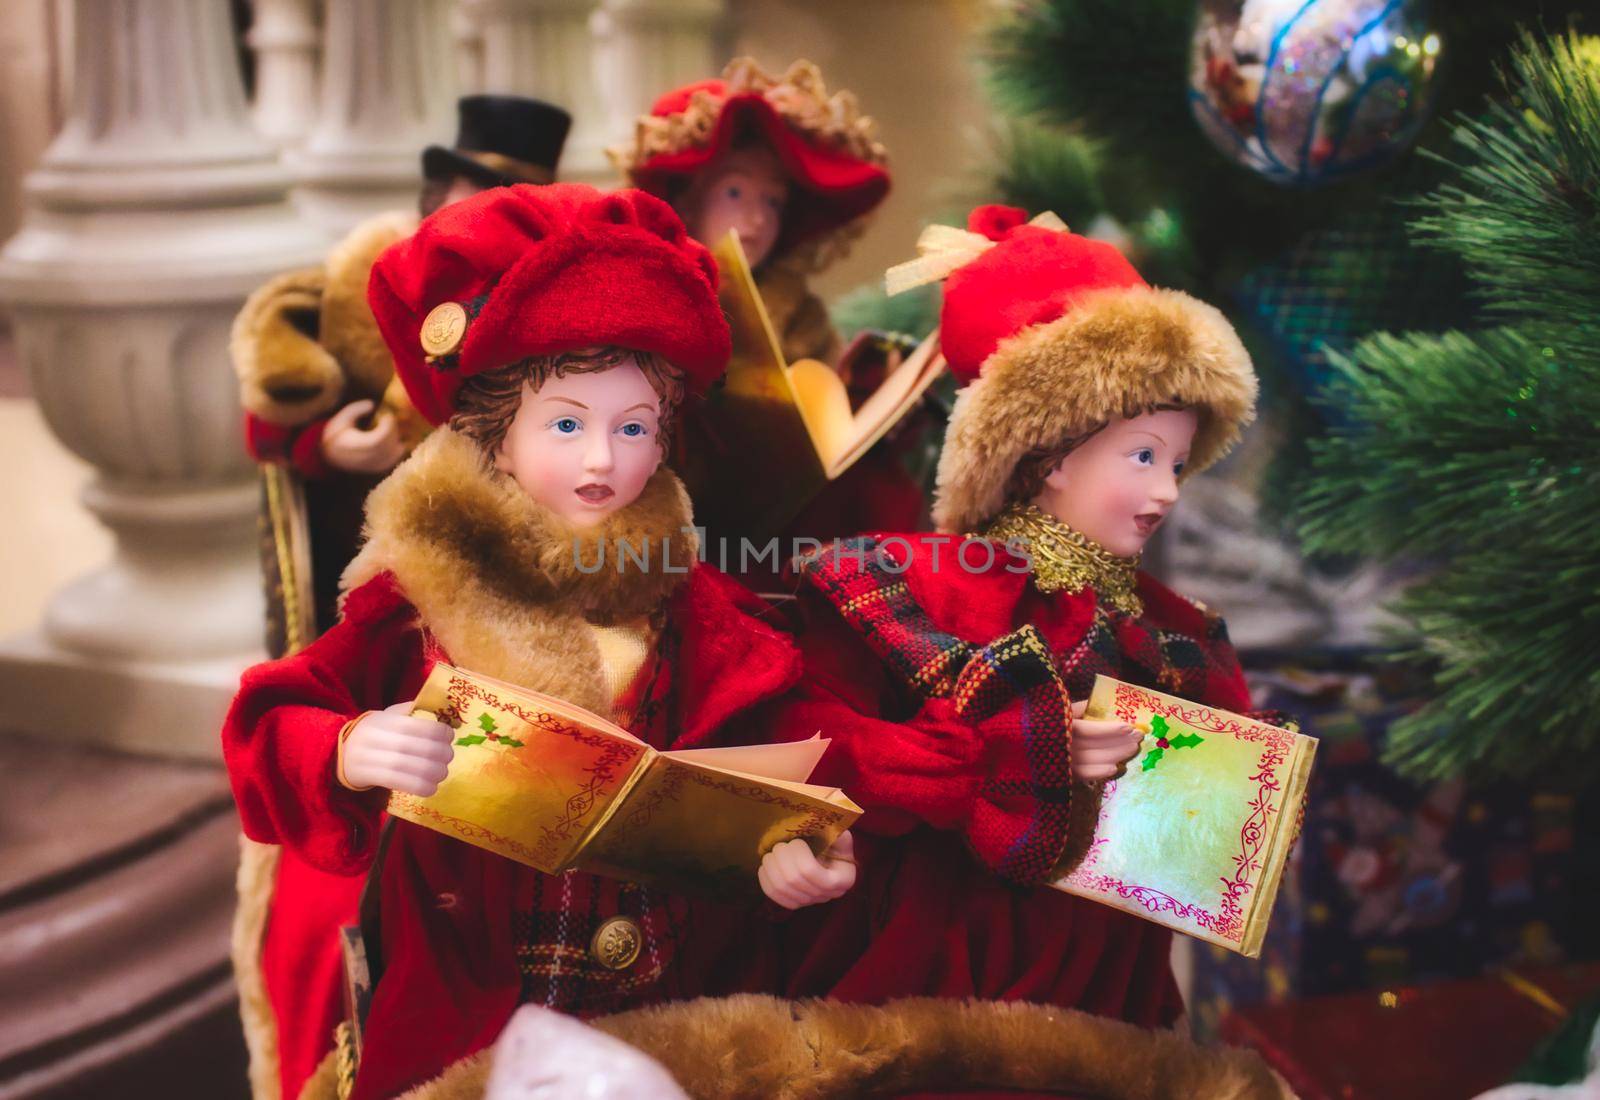 Classic traditional toy doll Christmas carol singers by tennesseewitney